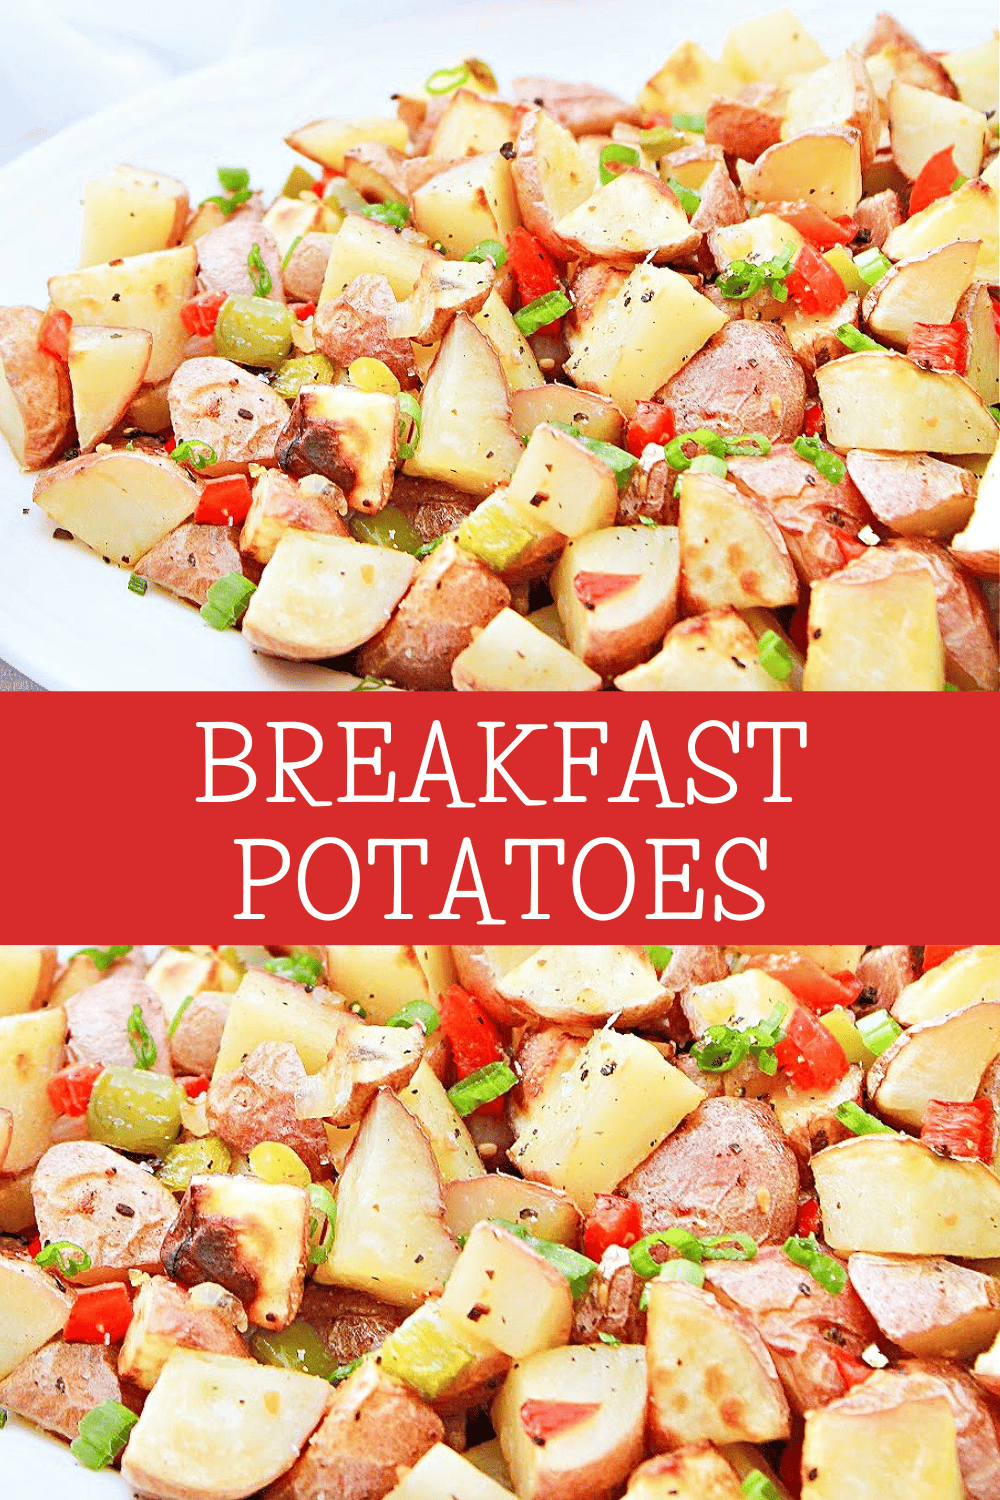 Breakfast Potatoes ~ Oven-roasted red potatoes with bell peppers and simple seasonings are an easy, flavorful, and budget-friendly side dish any time of day!  via @thiswifecooks